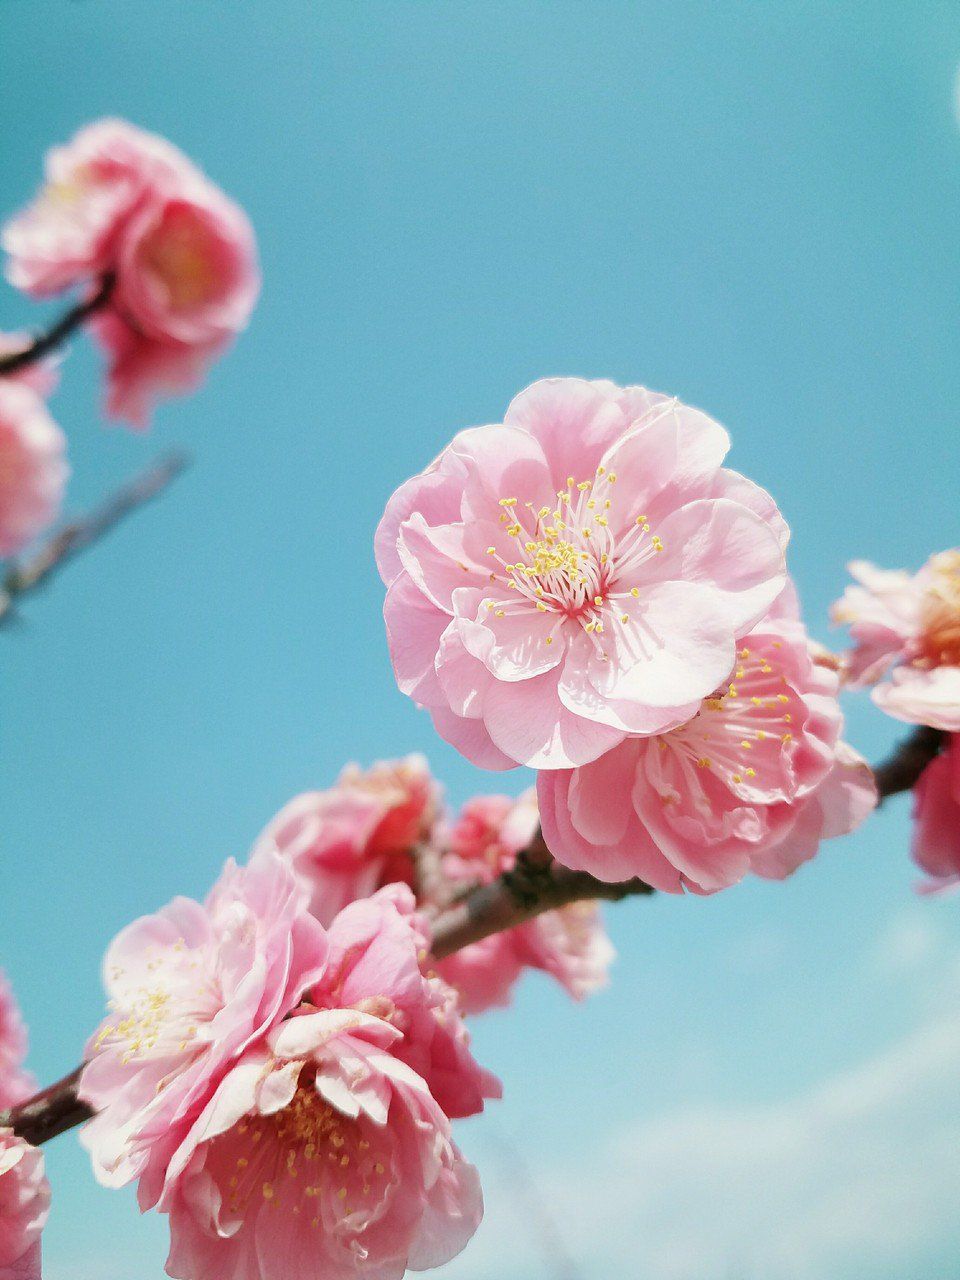 A close up of some pink flowers on the branch - Cherry blossom